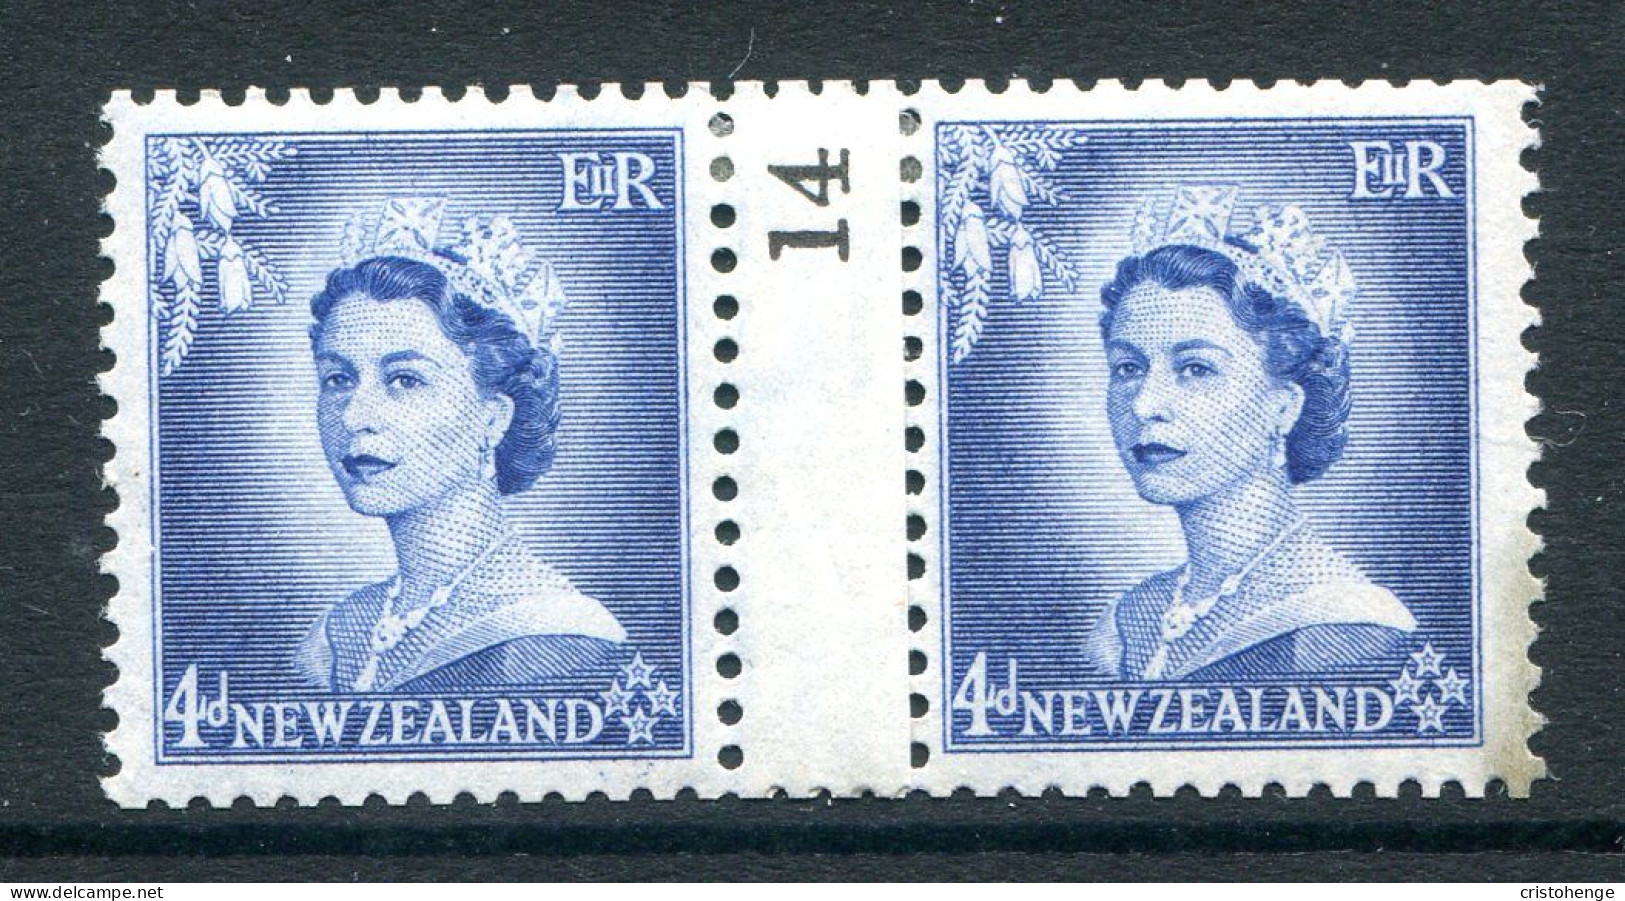 New Zealand 1953-59 QEII Definitives - Coil Pairs - 4d Blue - No. 14 - LHM (SG Unlisted) - Unused Stamps